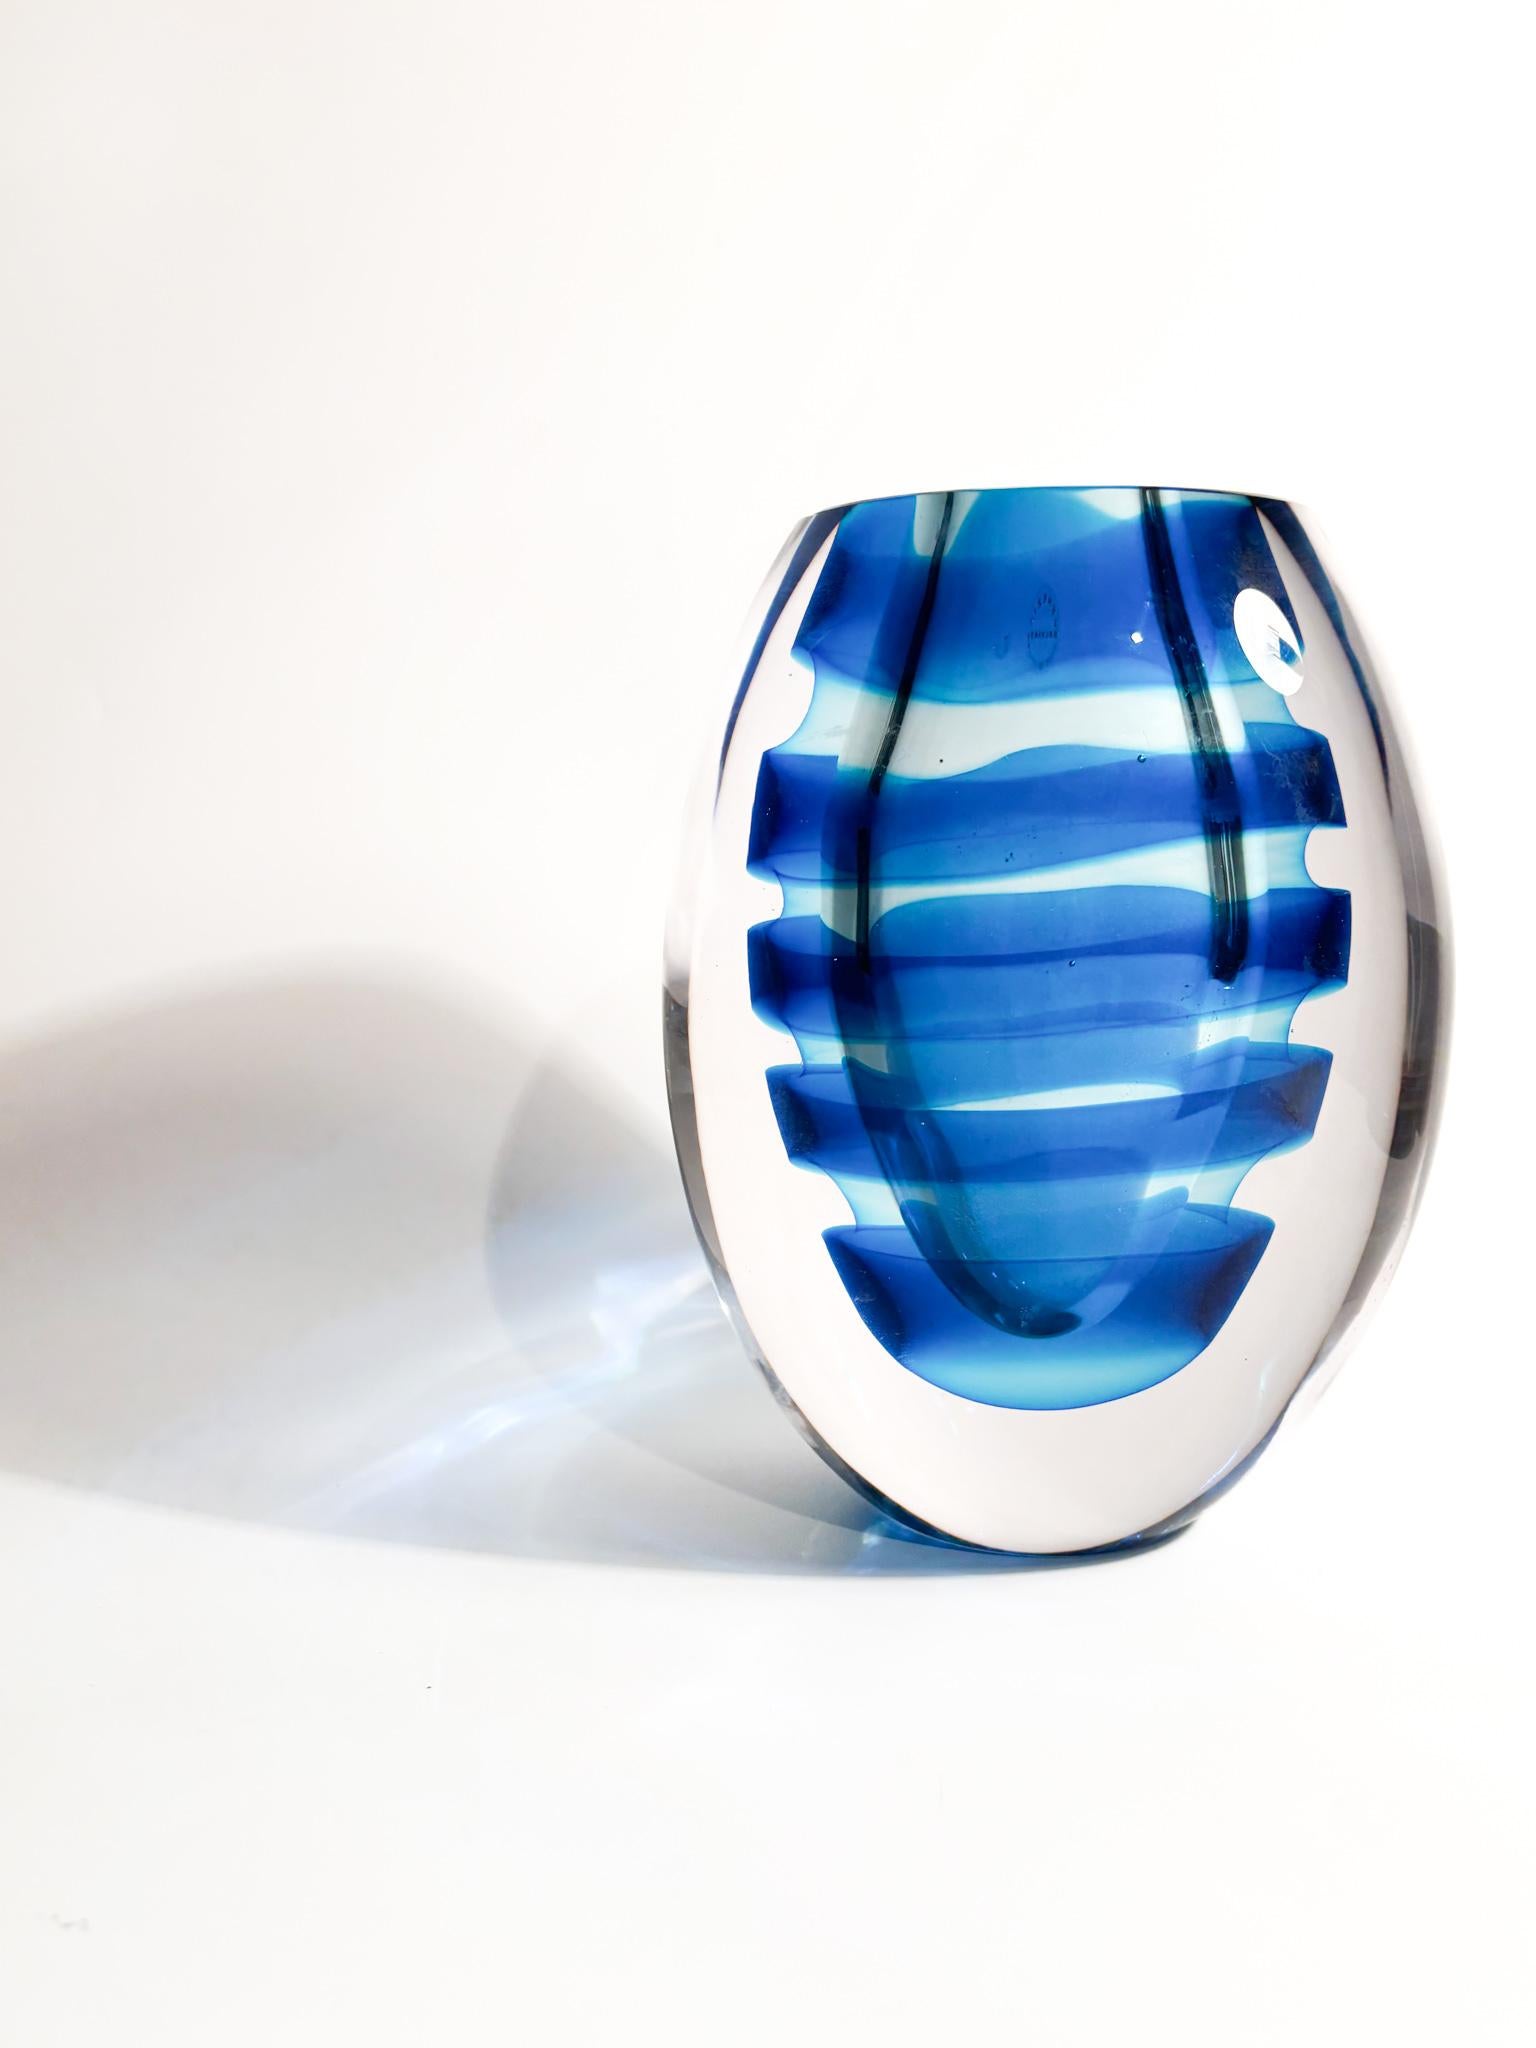 Mid-Century Modern Salviati Vase in Sommerso Blue Murano Glass from 2003 For Sale